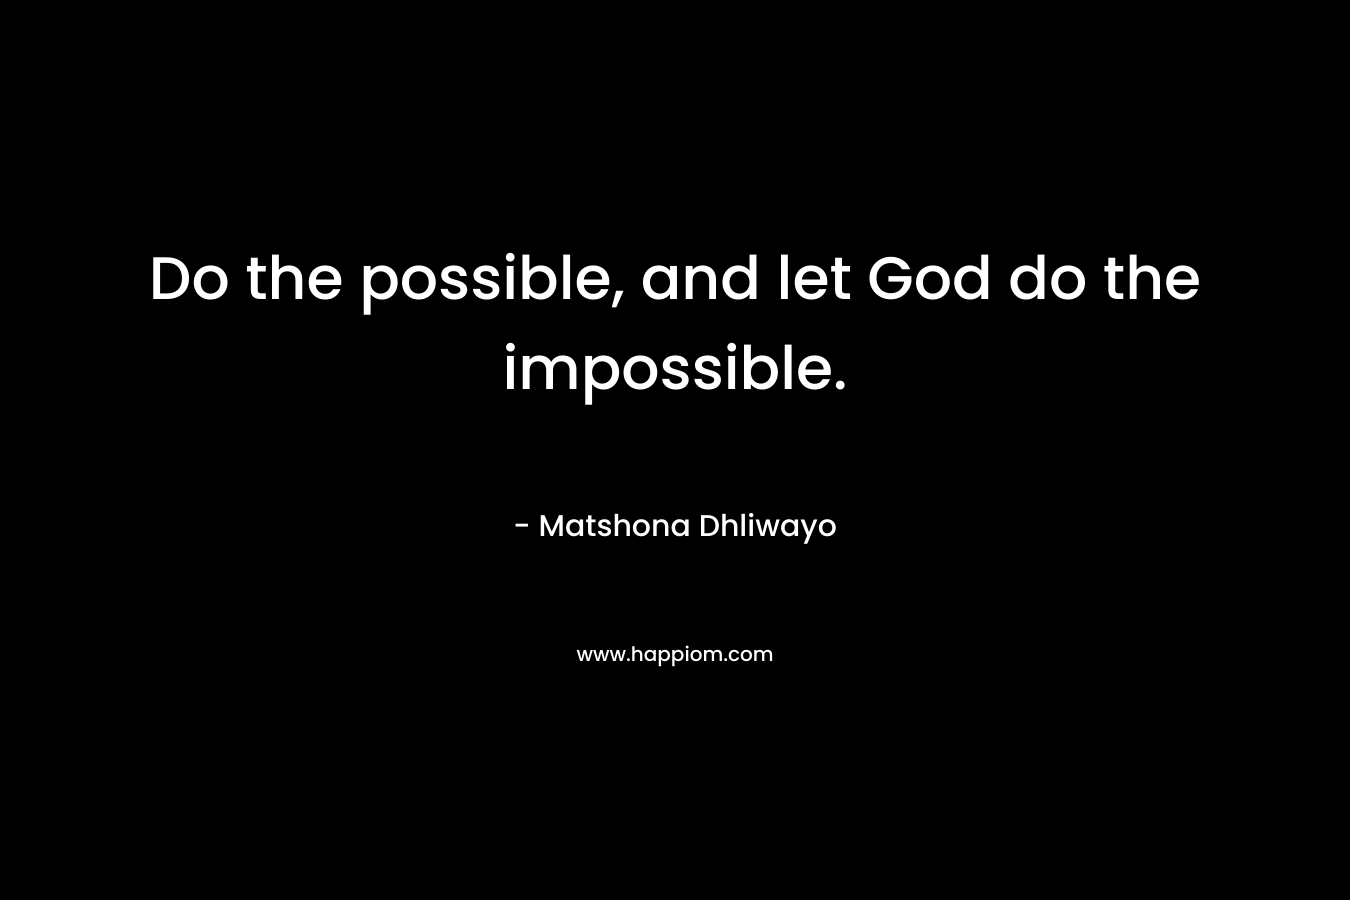 Do the possible, and let God do the impossible.